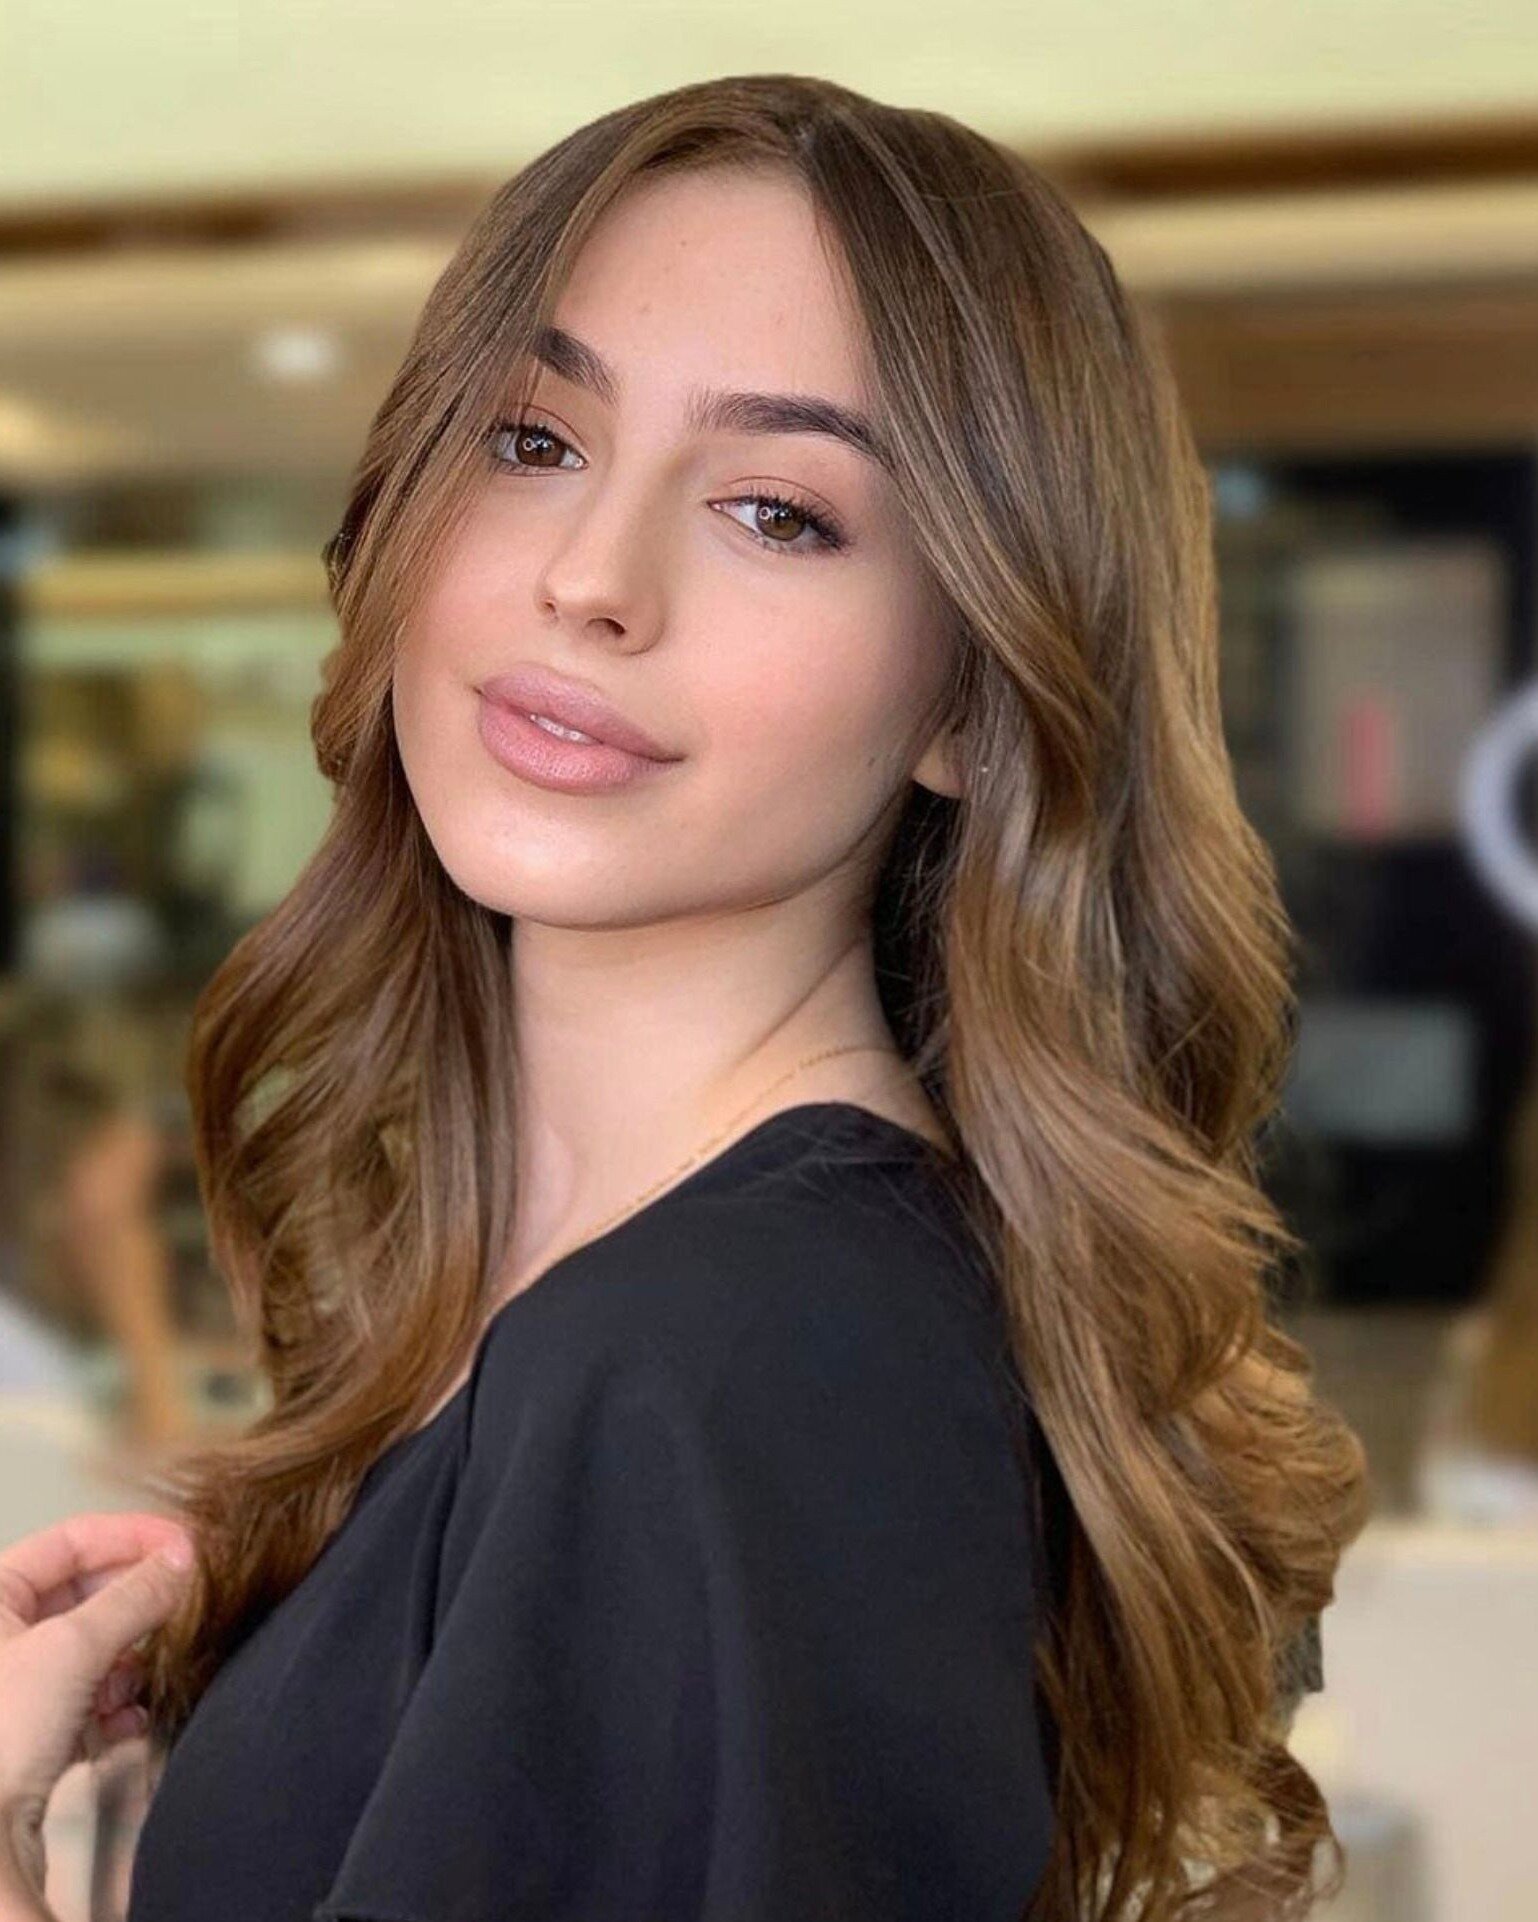 &quot;I love my hair because... It's a reflection of me, and me is beautiful.&quot;
&mdash;
📷: @hair_by_aloosh
.
.
.
#beautifulme #goodhairday #sexyhairstyle #hairstylequotes #quotes #beautyquotes #hairinyourhair #hairextensions #hairporn #styles #h